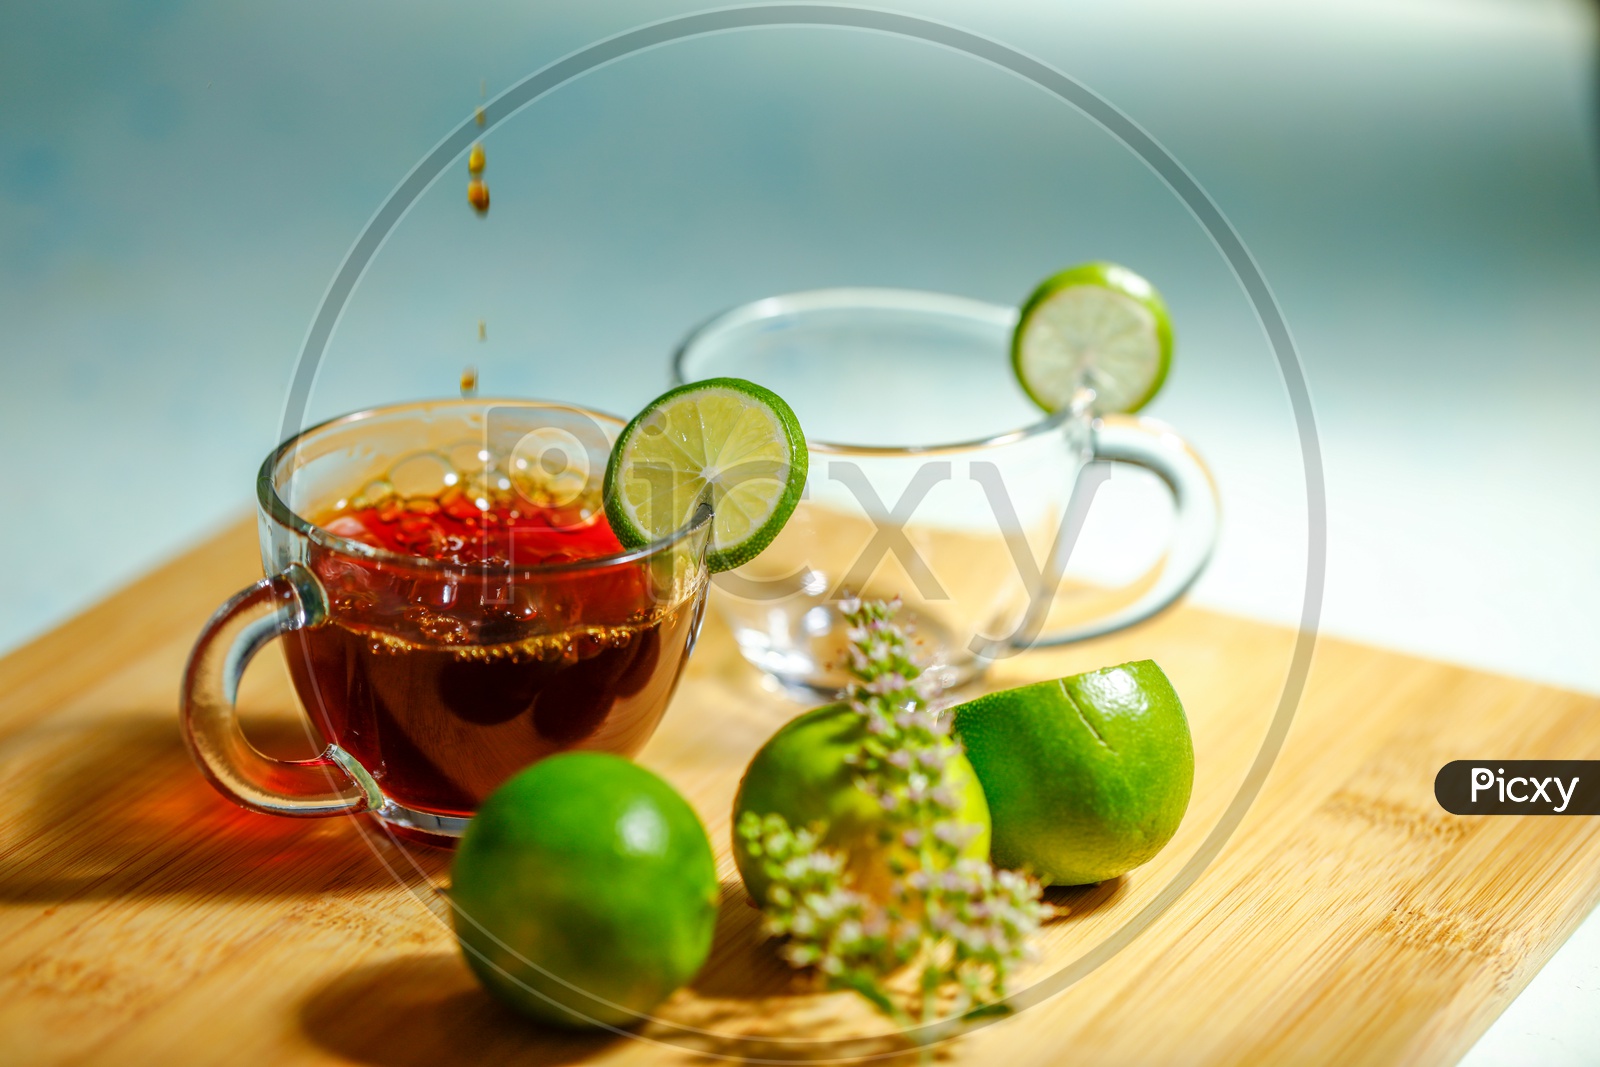 Black Tea In a Glass Cup With Lemons  on an Wooden Table Background